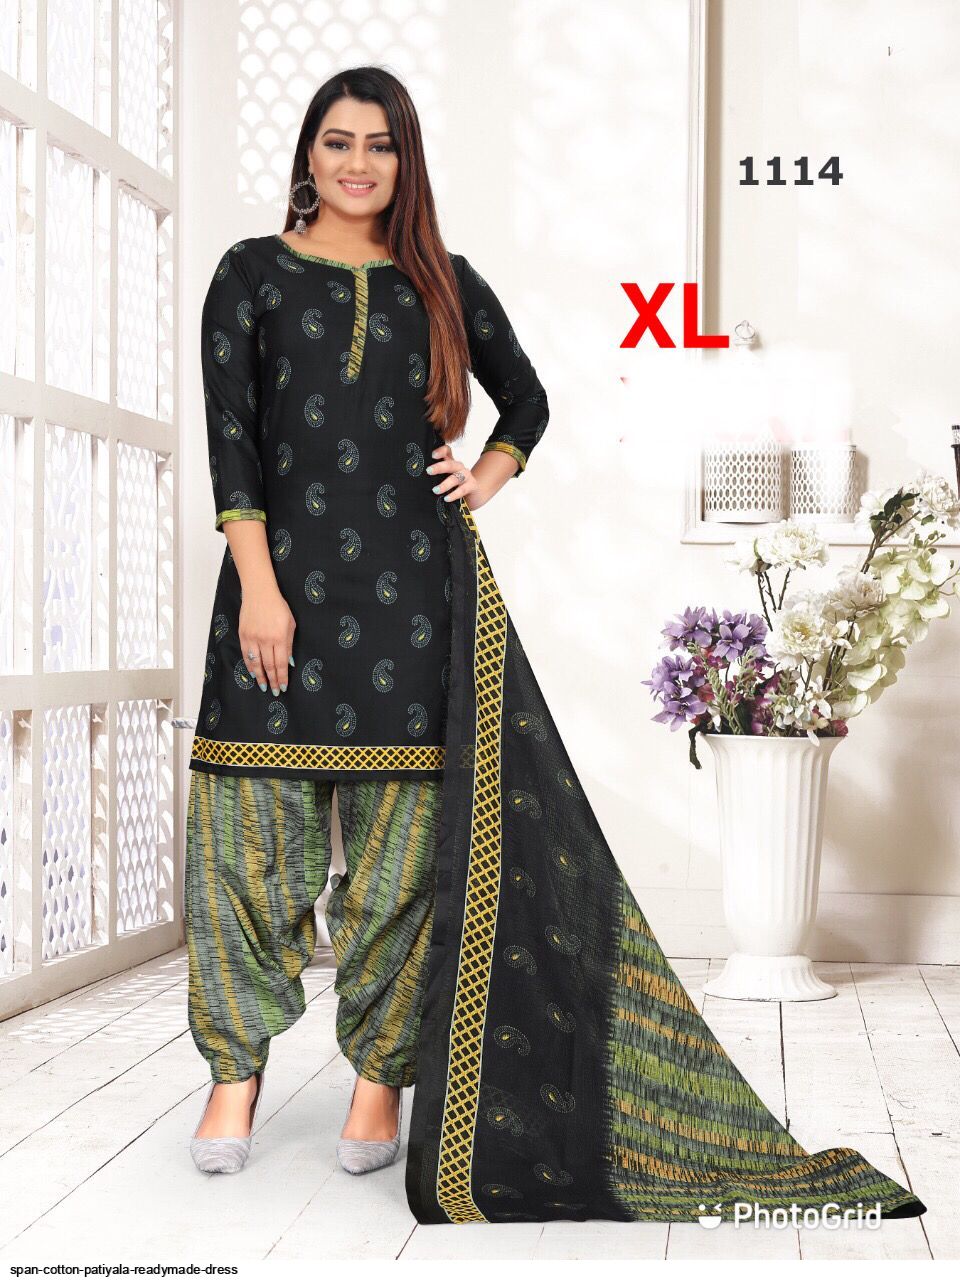 Multicoloured Stylish Printed Full Sleeves Ladies Cotton Patiyala Suit With  Dupatta, L, Xl, Xxl Size at Best Price in Ahmedabad | Bandhan Fashion